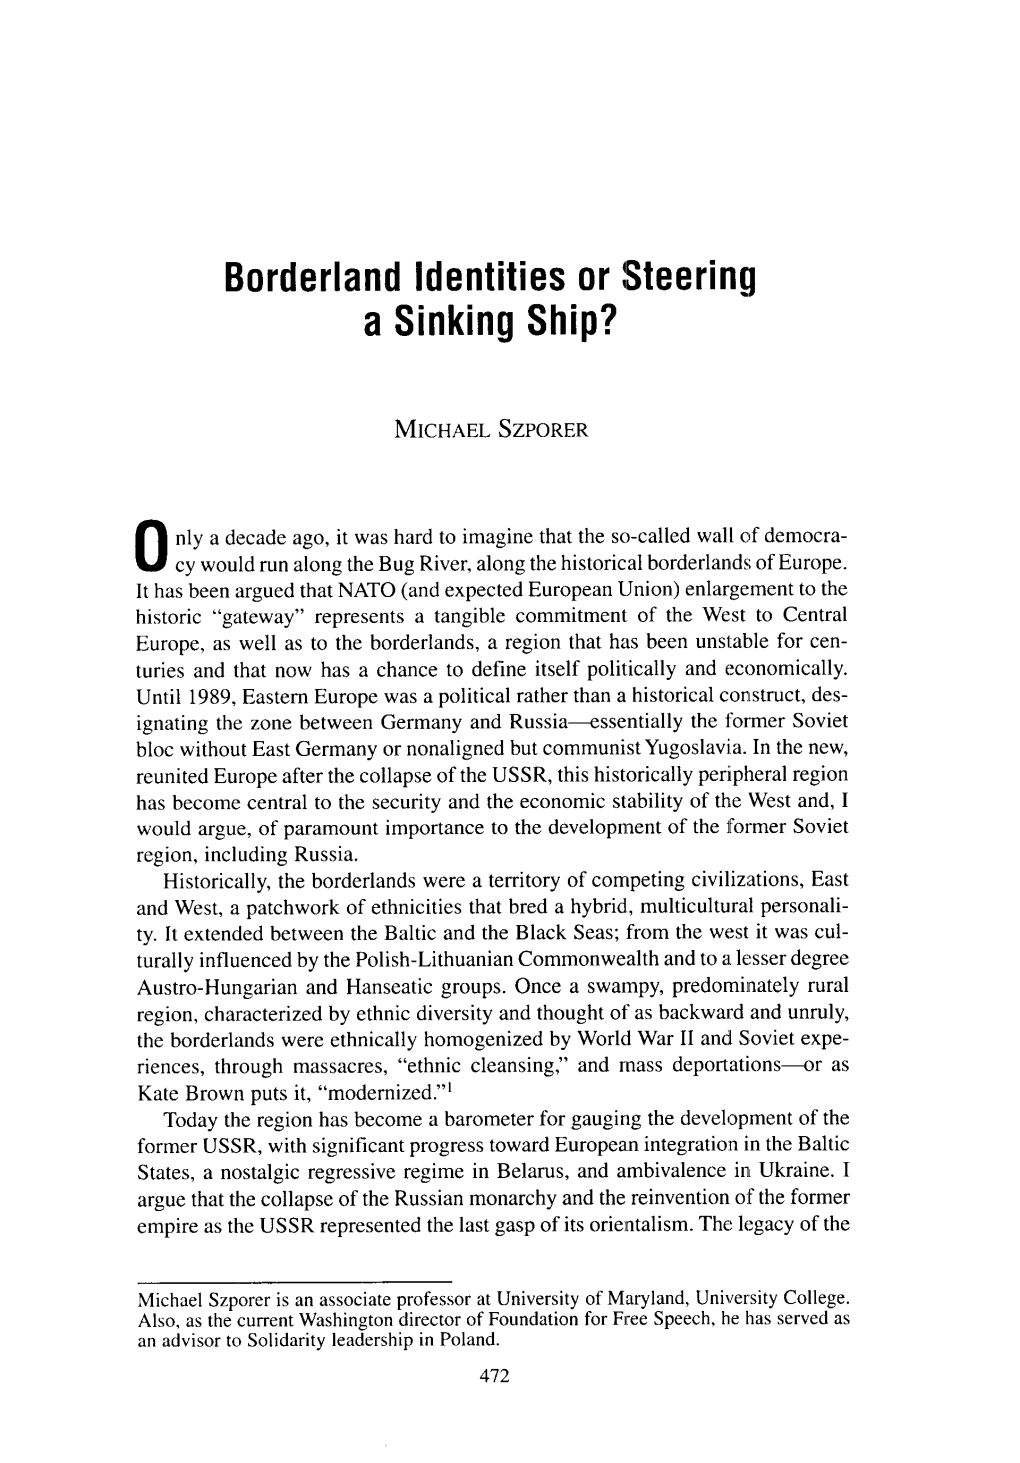 Borderland Identities Or Steering a Sinking Ship?